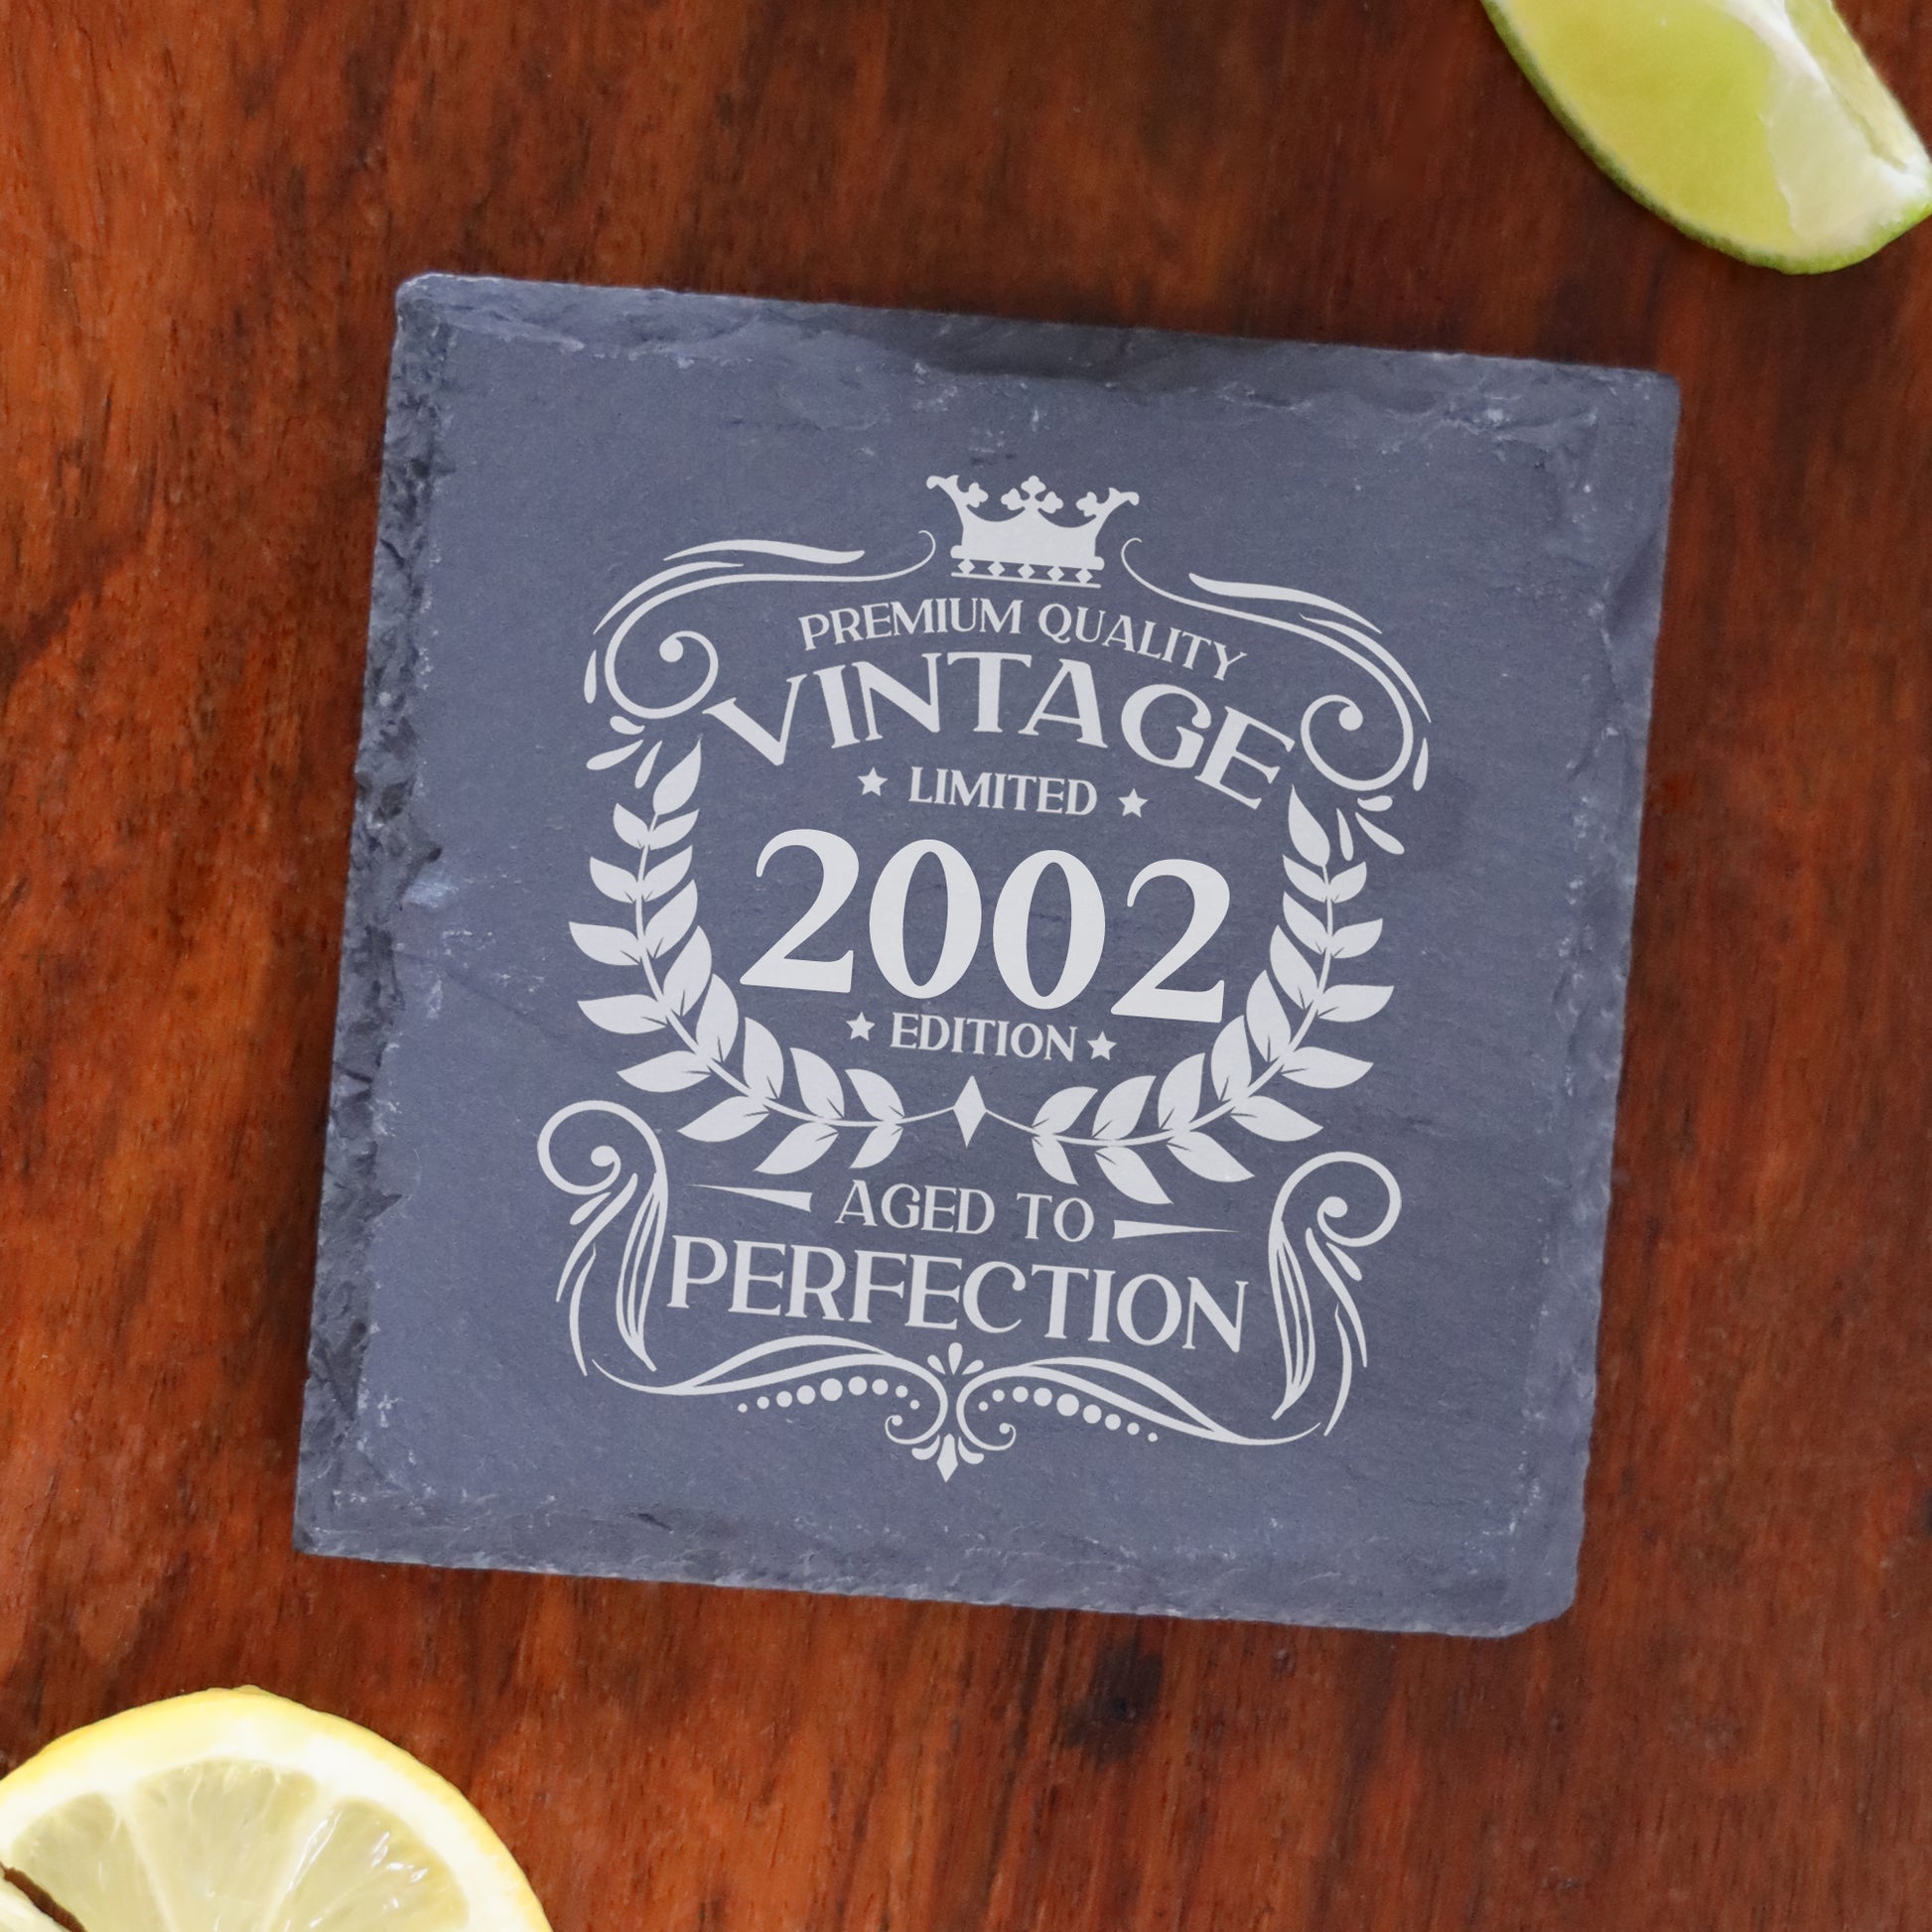 Vintage 2002 21st Birthday Engraved Gin Glass Gift  - Always Looking Good - Square Coaster Only  